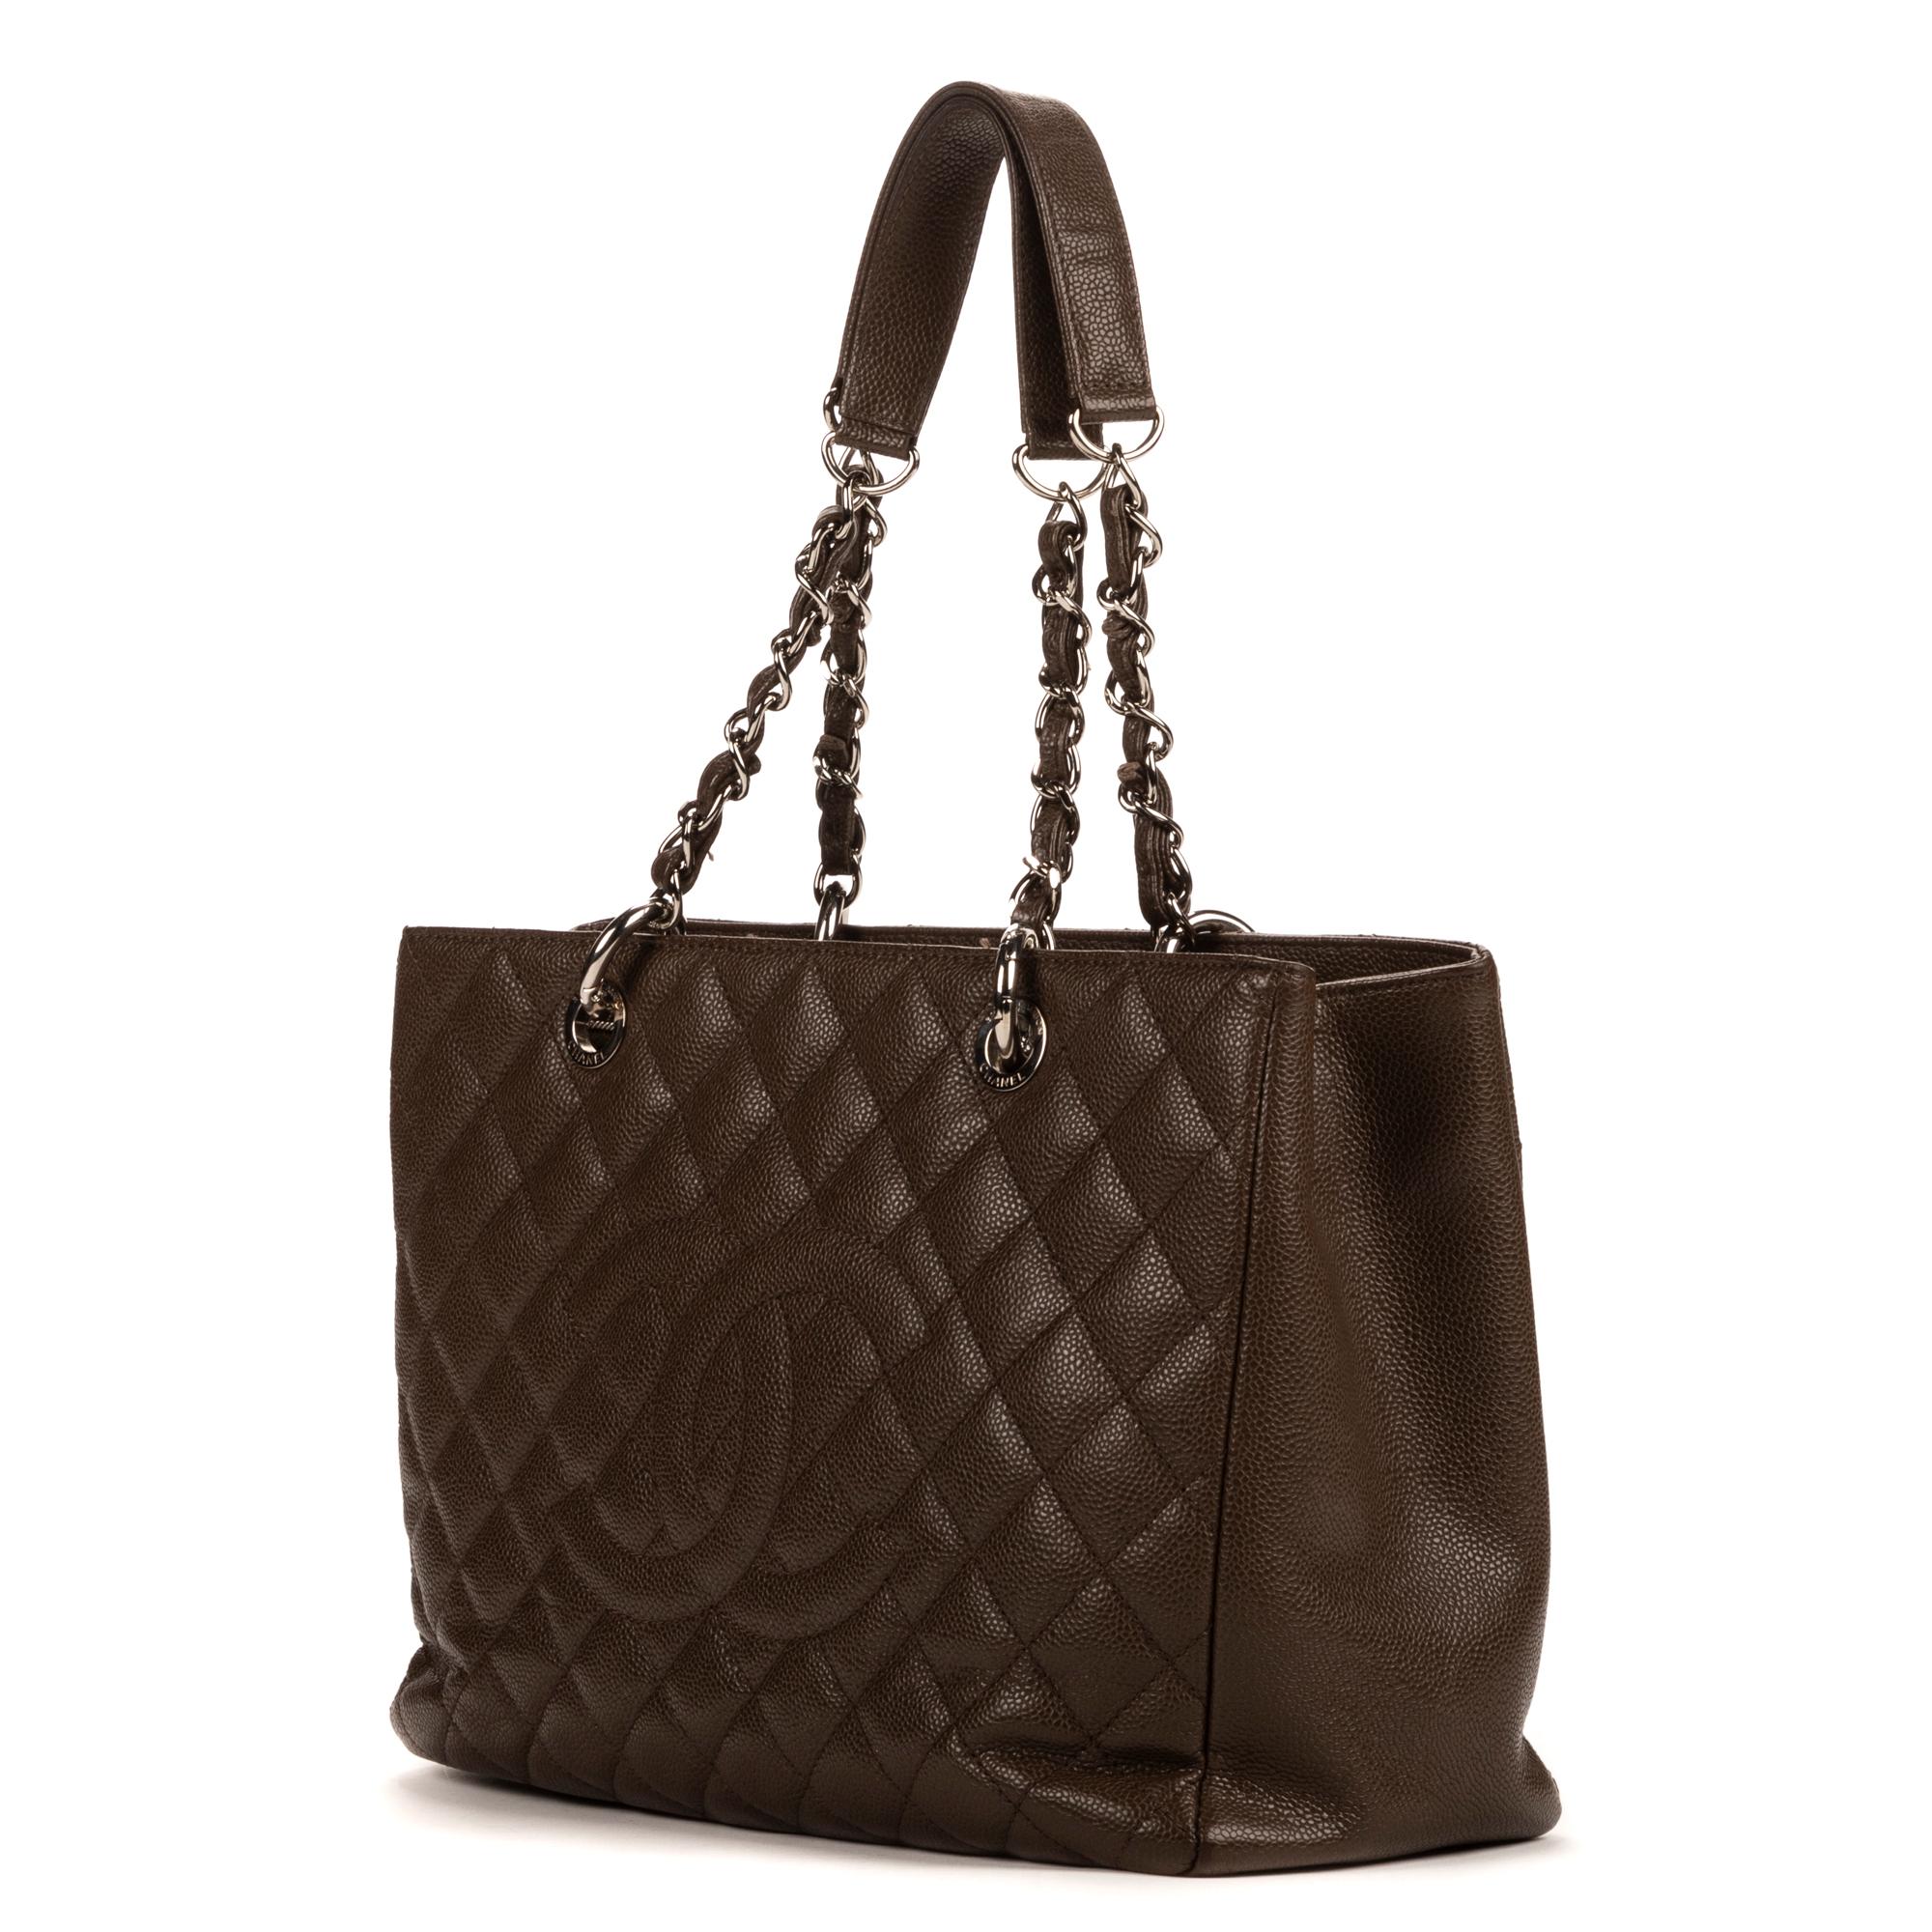 Introducing the Chanel Brown Grand Shopper: a fusion of practicality and luxury. Crafted from durable caviar leather in a rich brown hue, this spacious tote is your everyday essential. Its sleek silver hardware adds a touch of refinement, while the